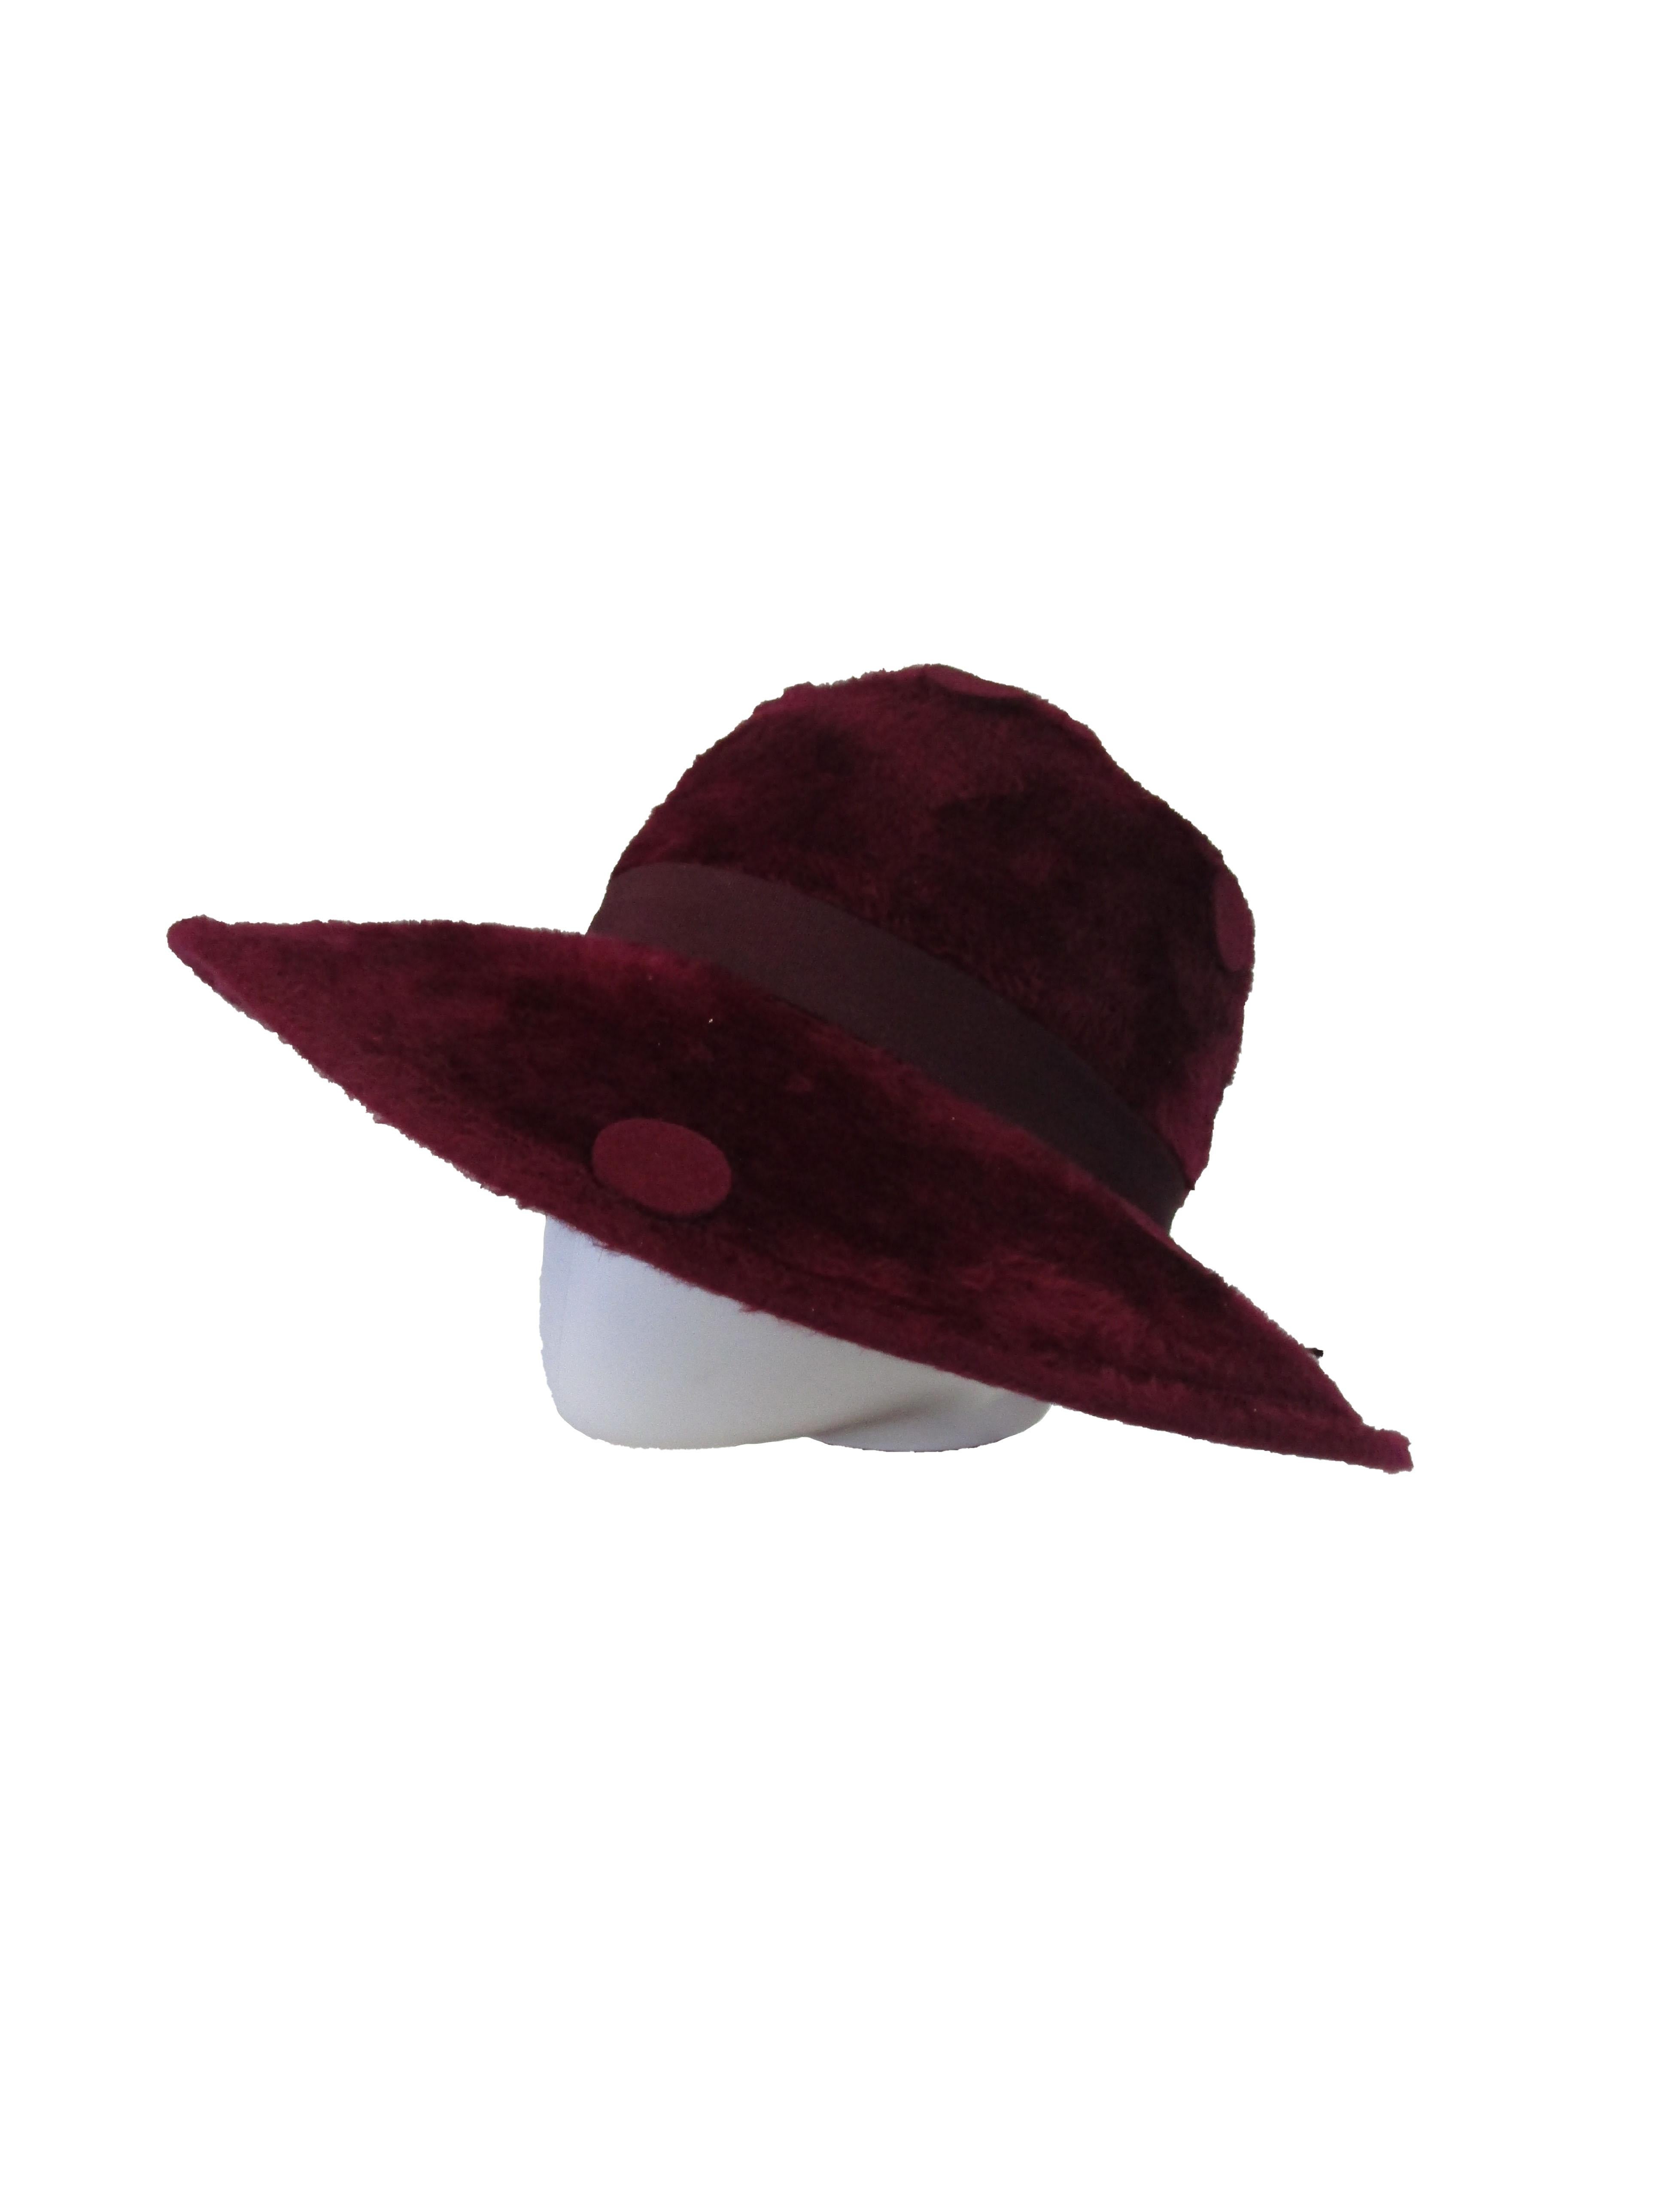 

Check out this effortlessly cool hat from Yves Saint Laurent that will easily liven up your wardrobe! The body of the hat is a wine red *faux* fur that is decorated with large felt dots throughout. A deep red grosgrain band wraps around the hat